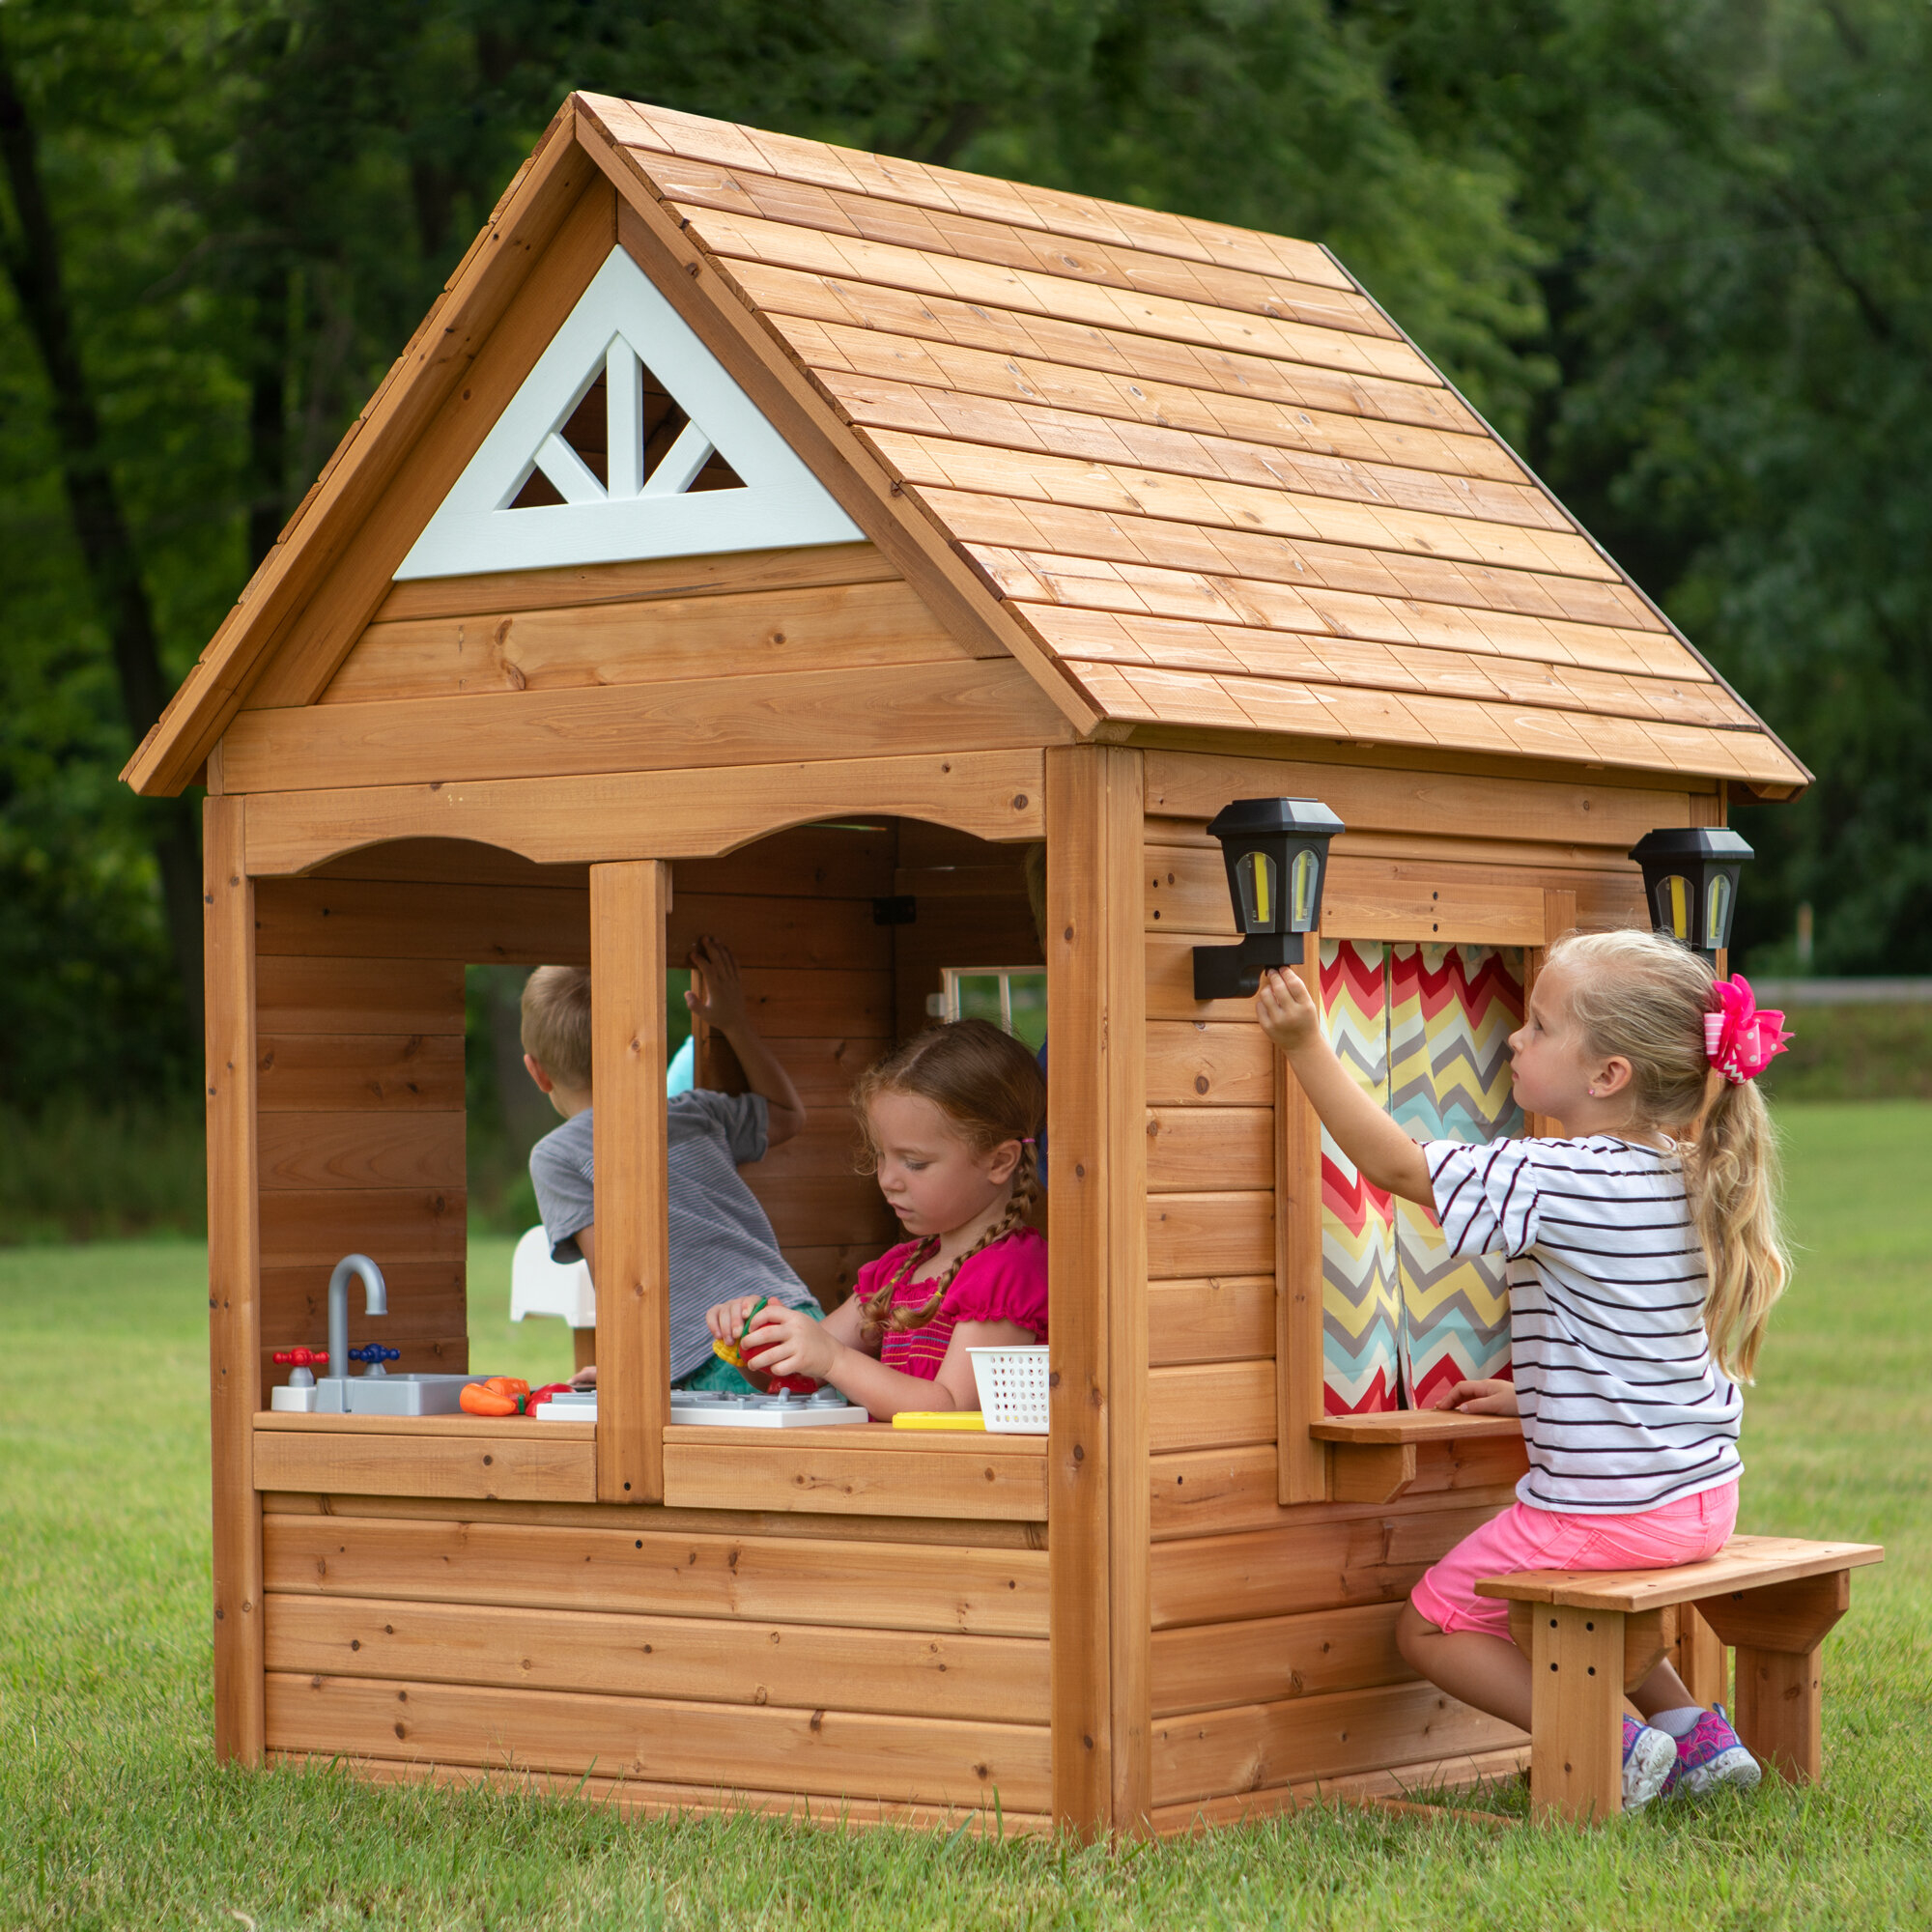 Affordable Wooden Playhouses Visualhunt, Wooden Outdoor Playhouse